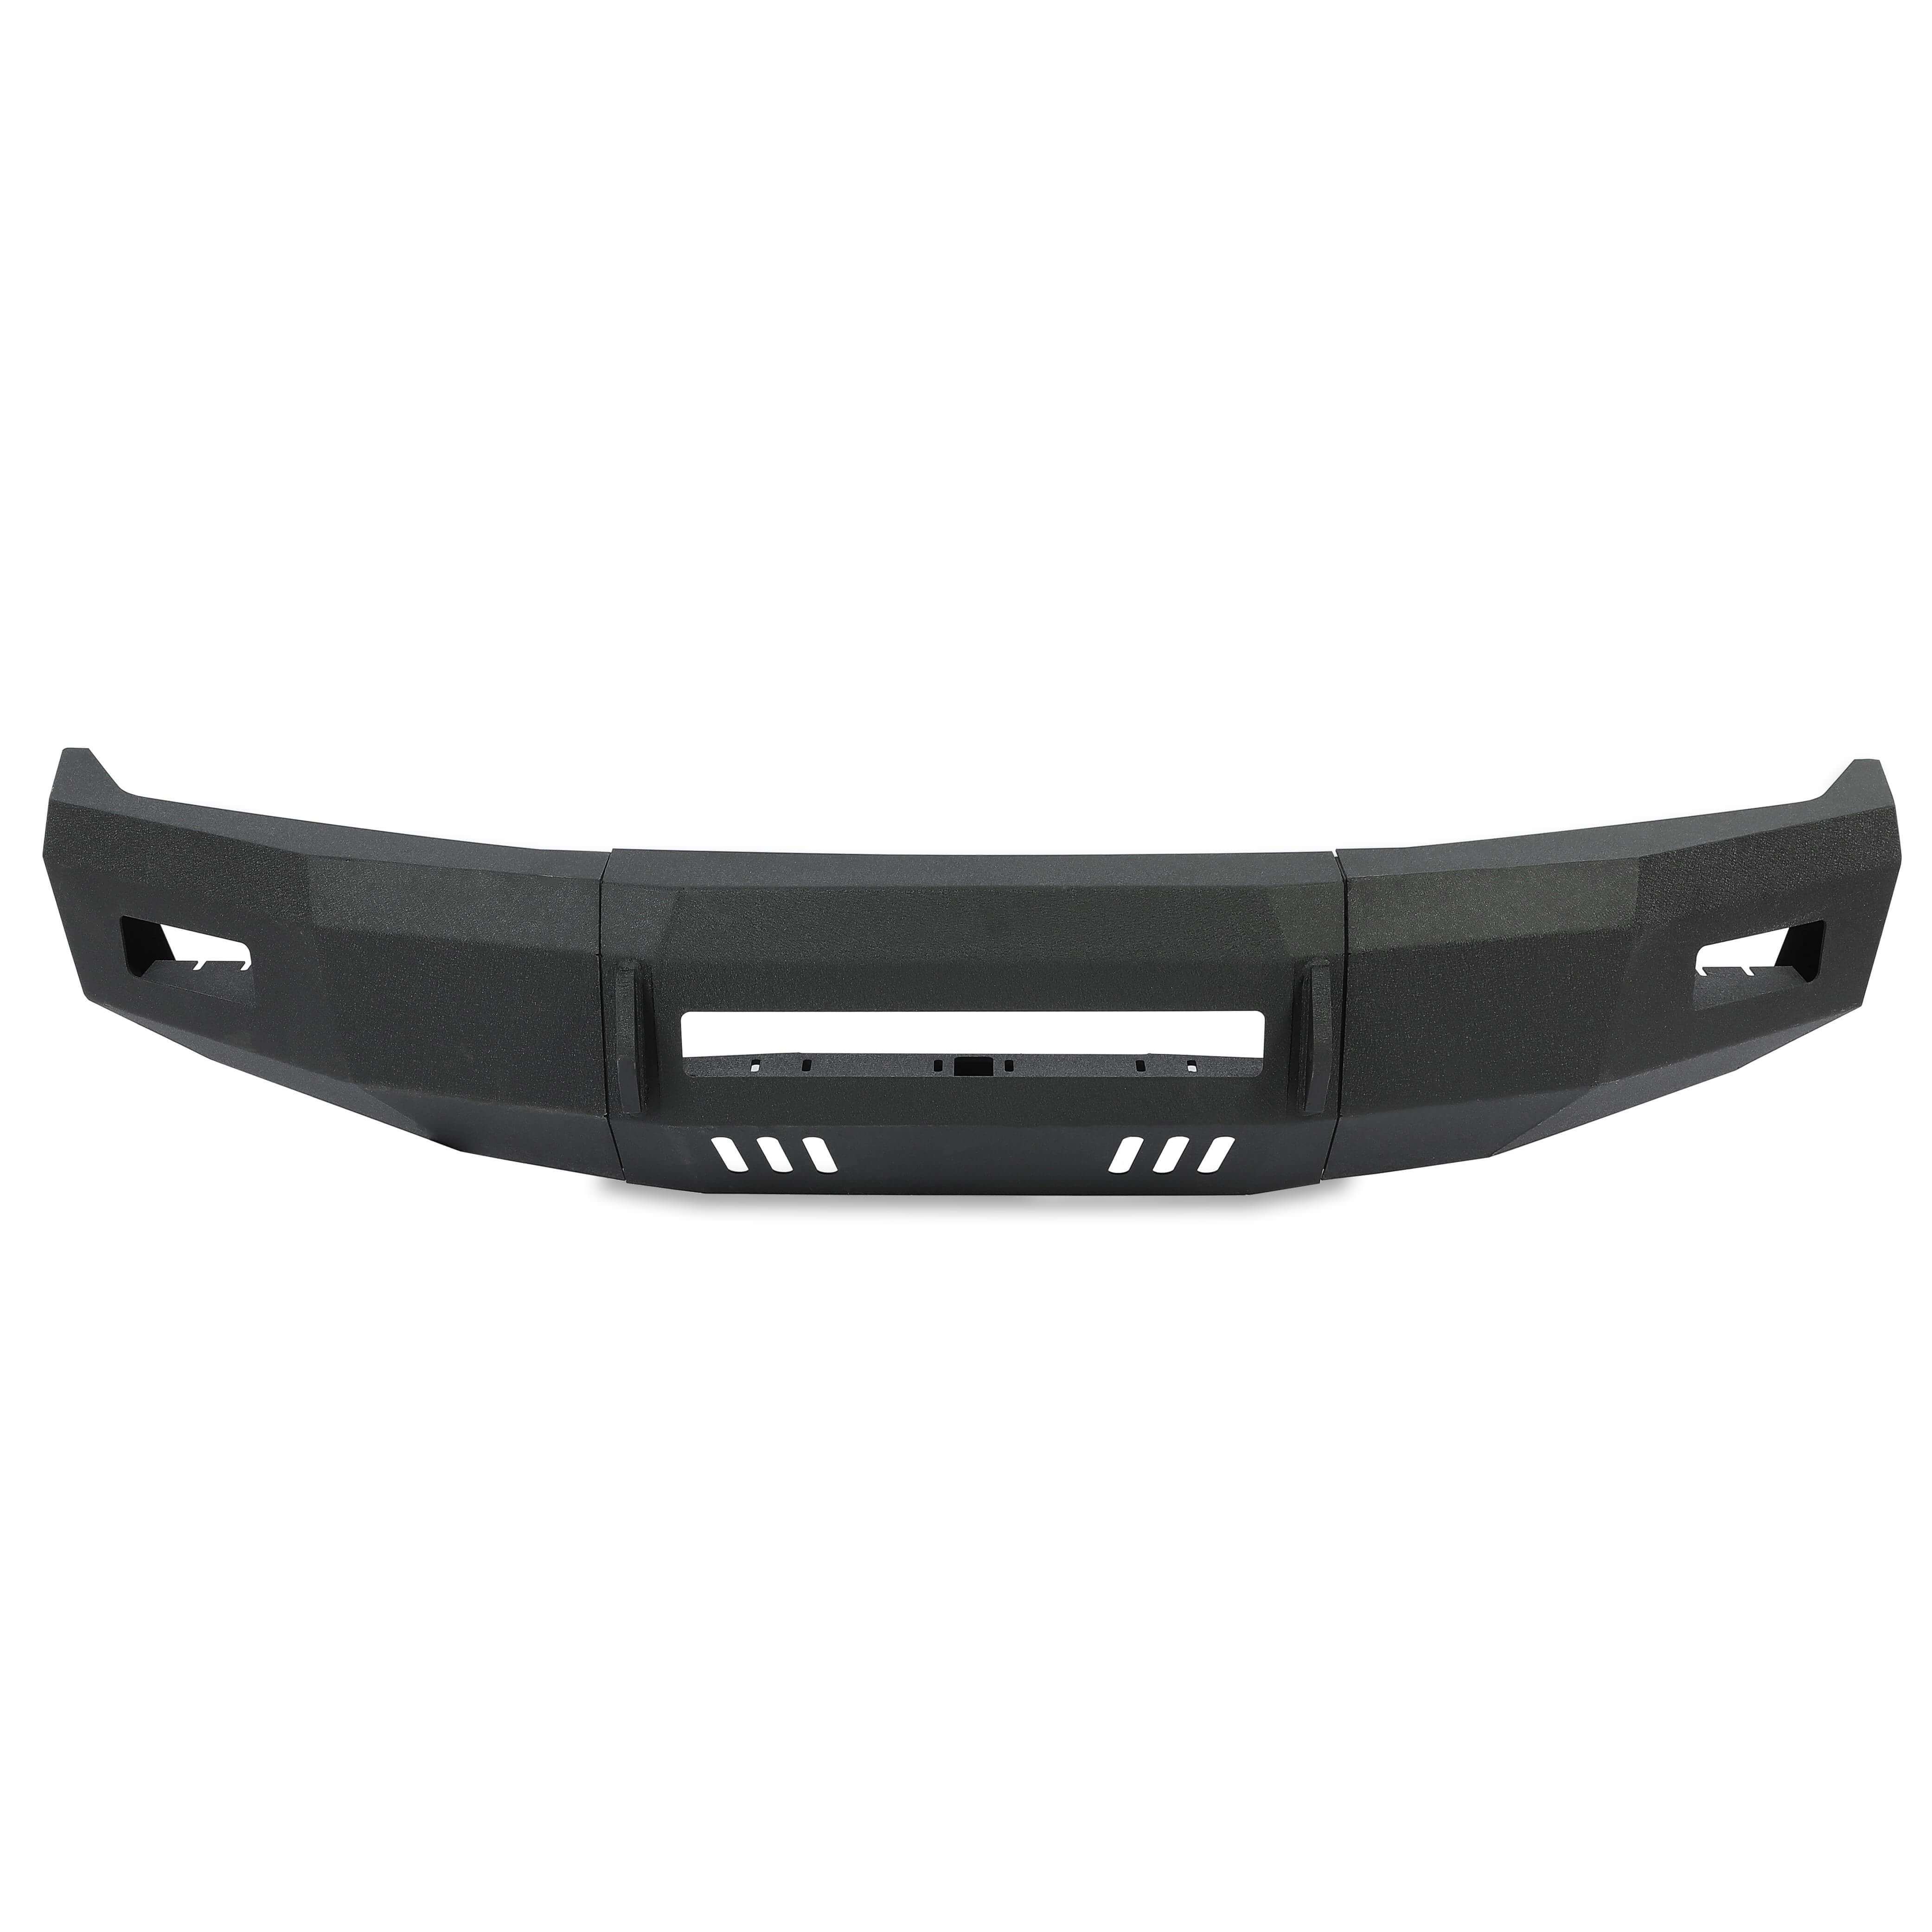 MR.GOP-Steel Front Bumper for 2008-2010 Ford F-250 F-350